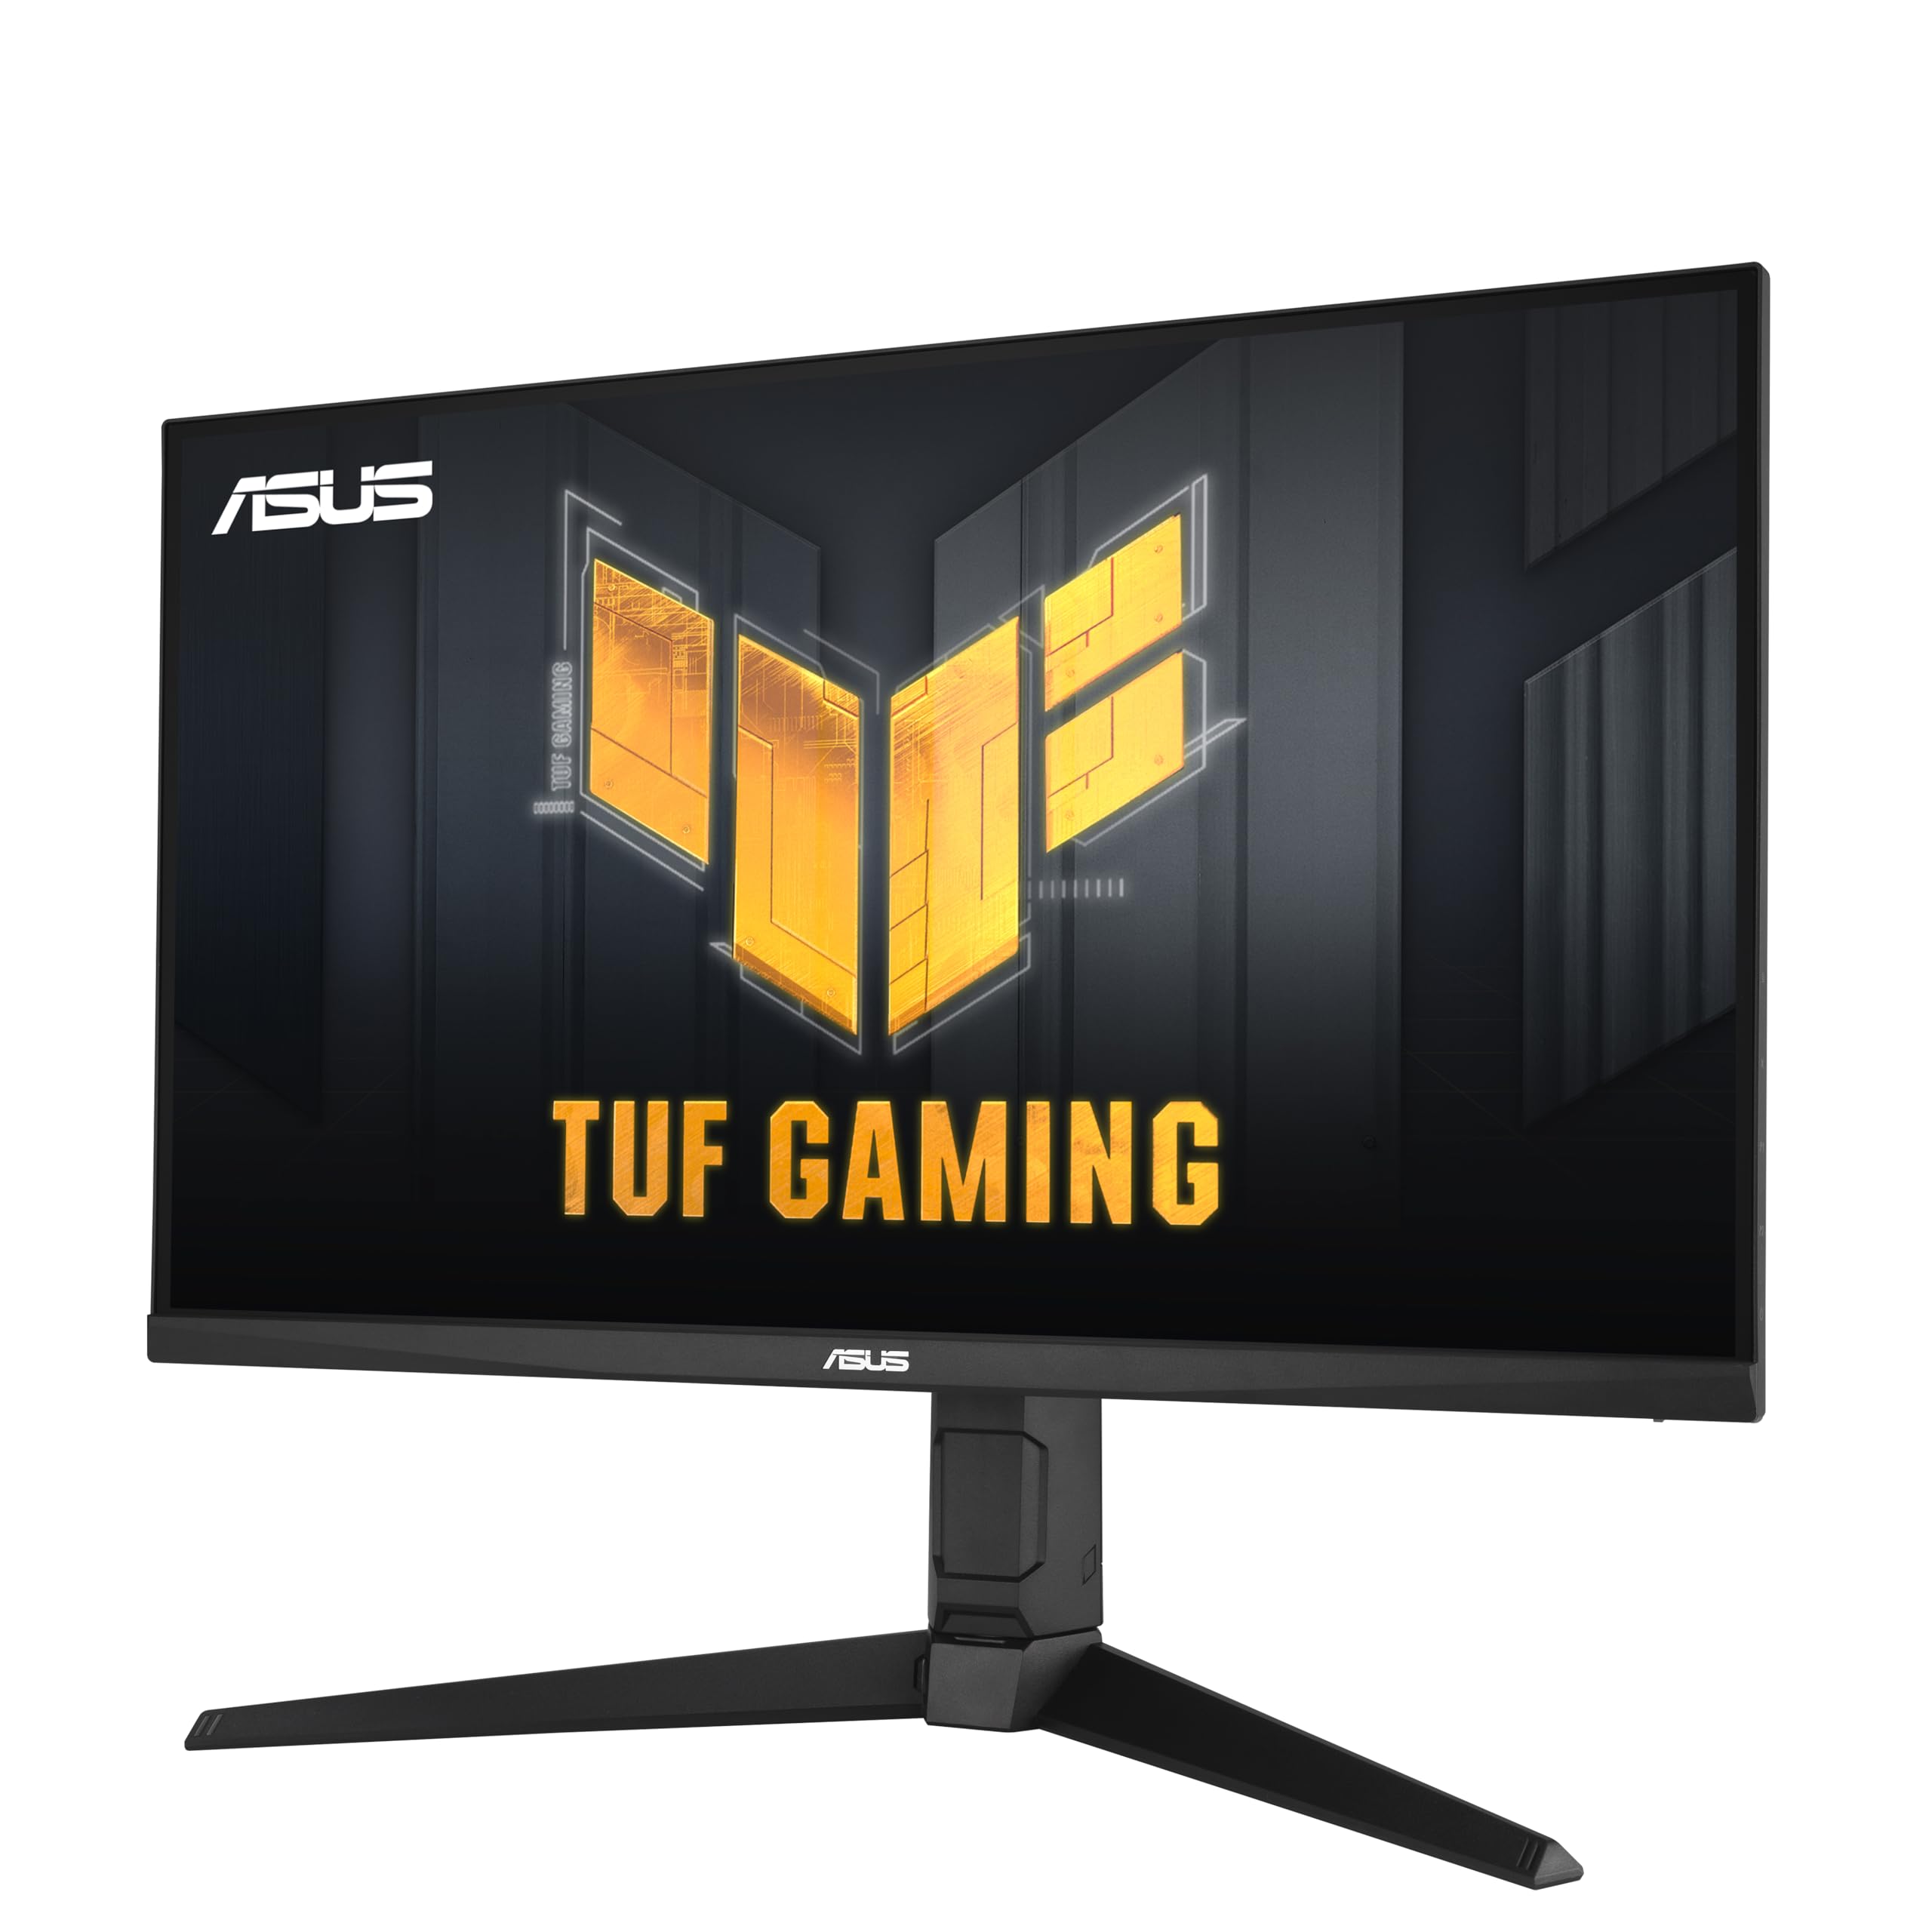 ASUS TUF Gaming 27” 1080P Monitor (VG279QL3A) - Full HD, 180Hz, 1ms, Fast IPS, Extreme Low Motion Blur, FreeSync Premium, G-SYNC Compatible, Speakers, DisplayPort, Height Adjustable, 3 Year Warranty